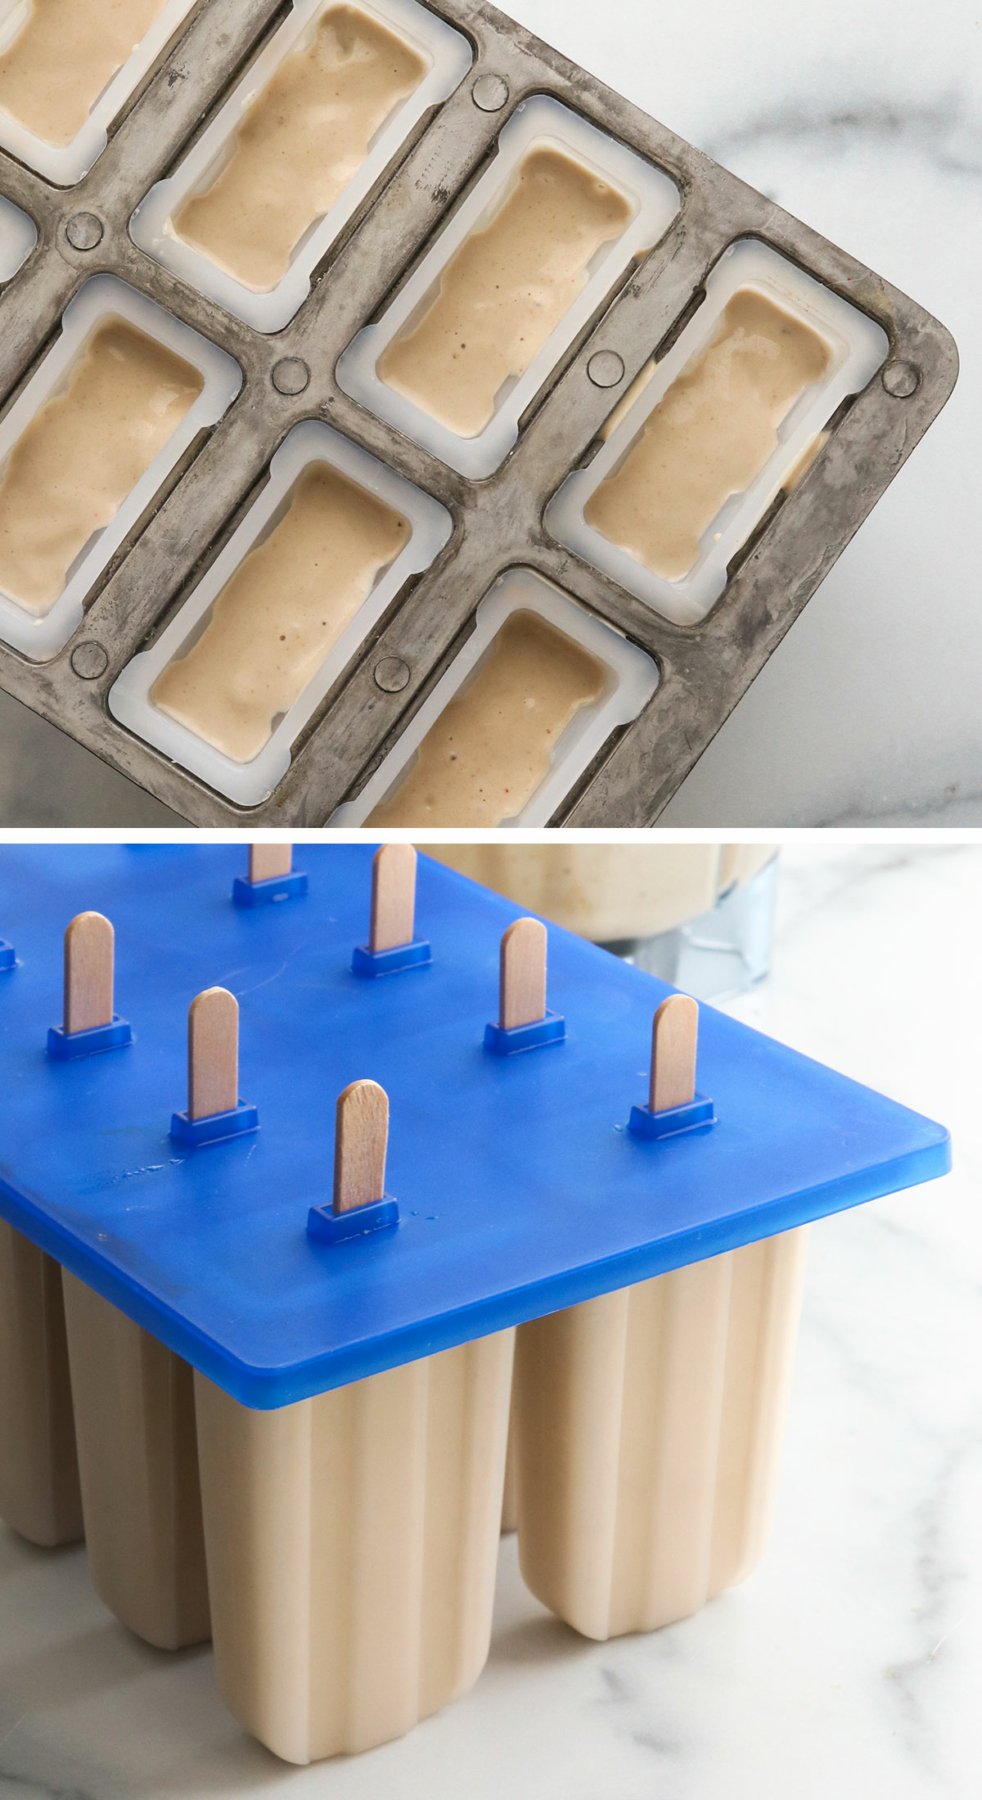 banana mixture added to a popsicle mold with sticks. 